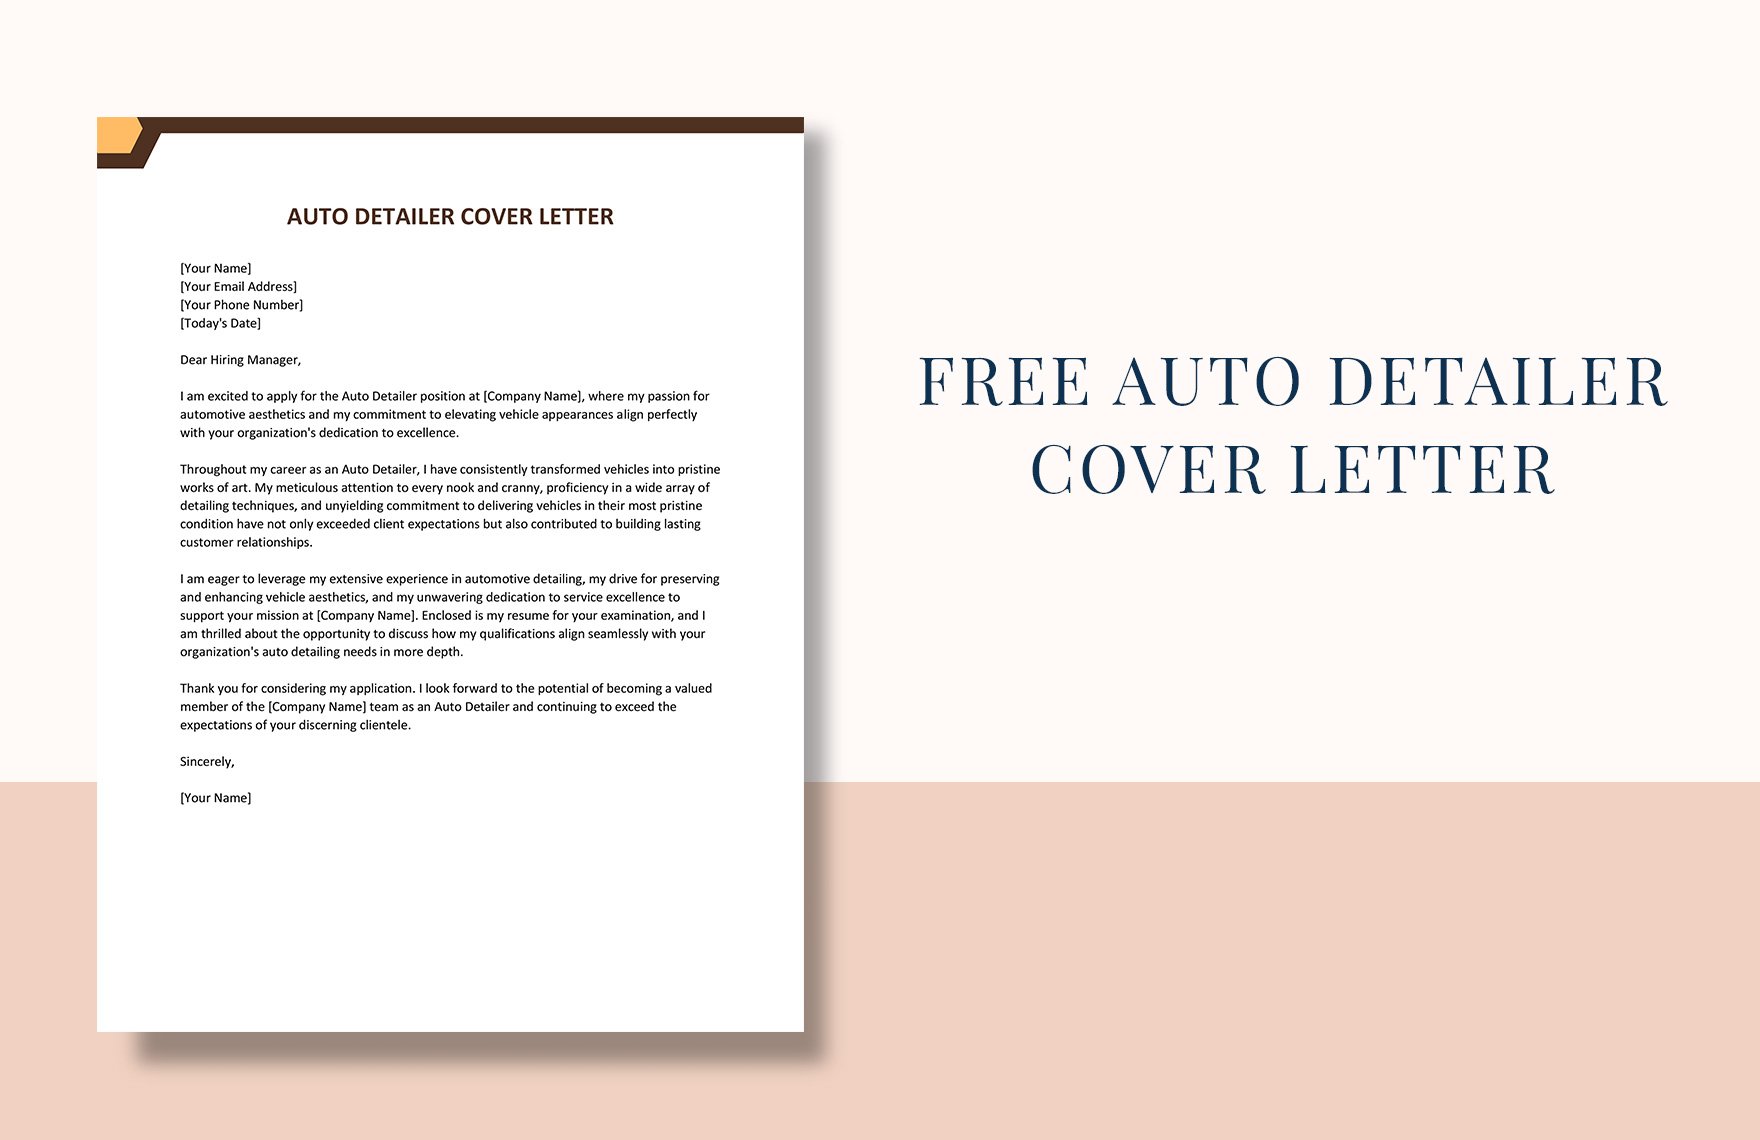 Auto Detailer Cover Letter in Word, Google Docs